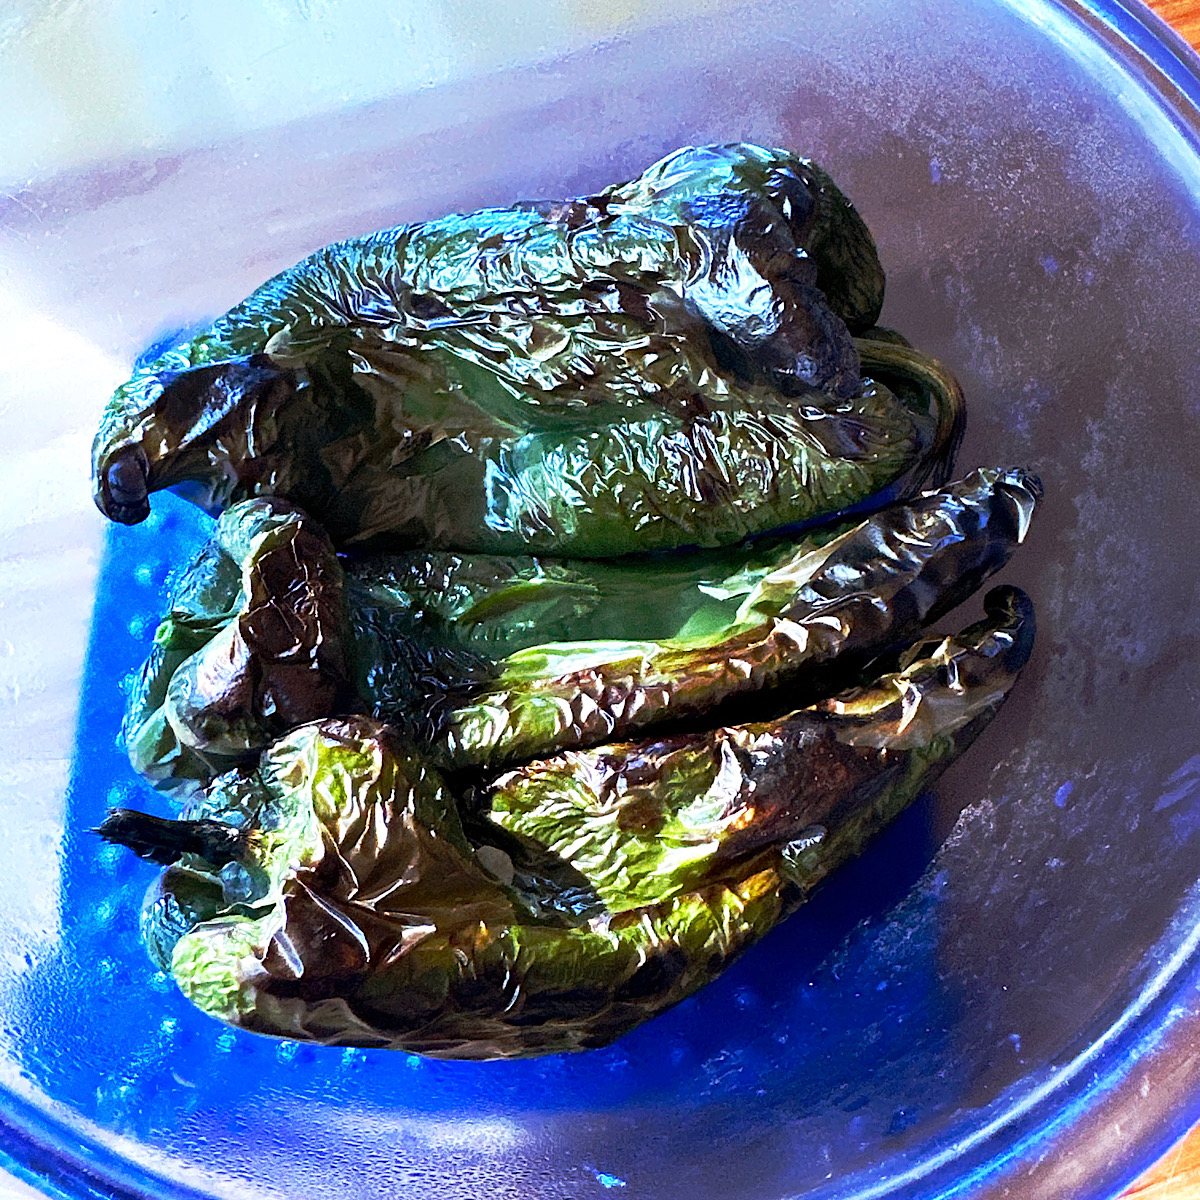 Blackened poblano peppers in a blue bowl.